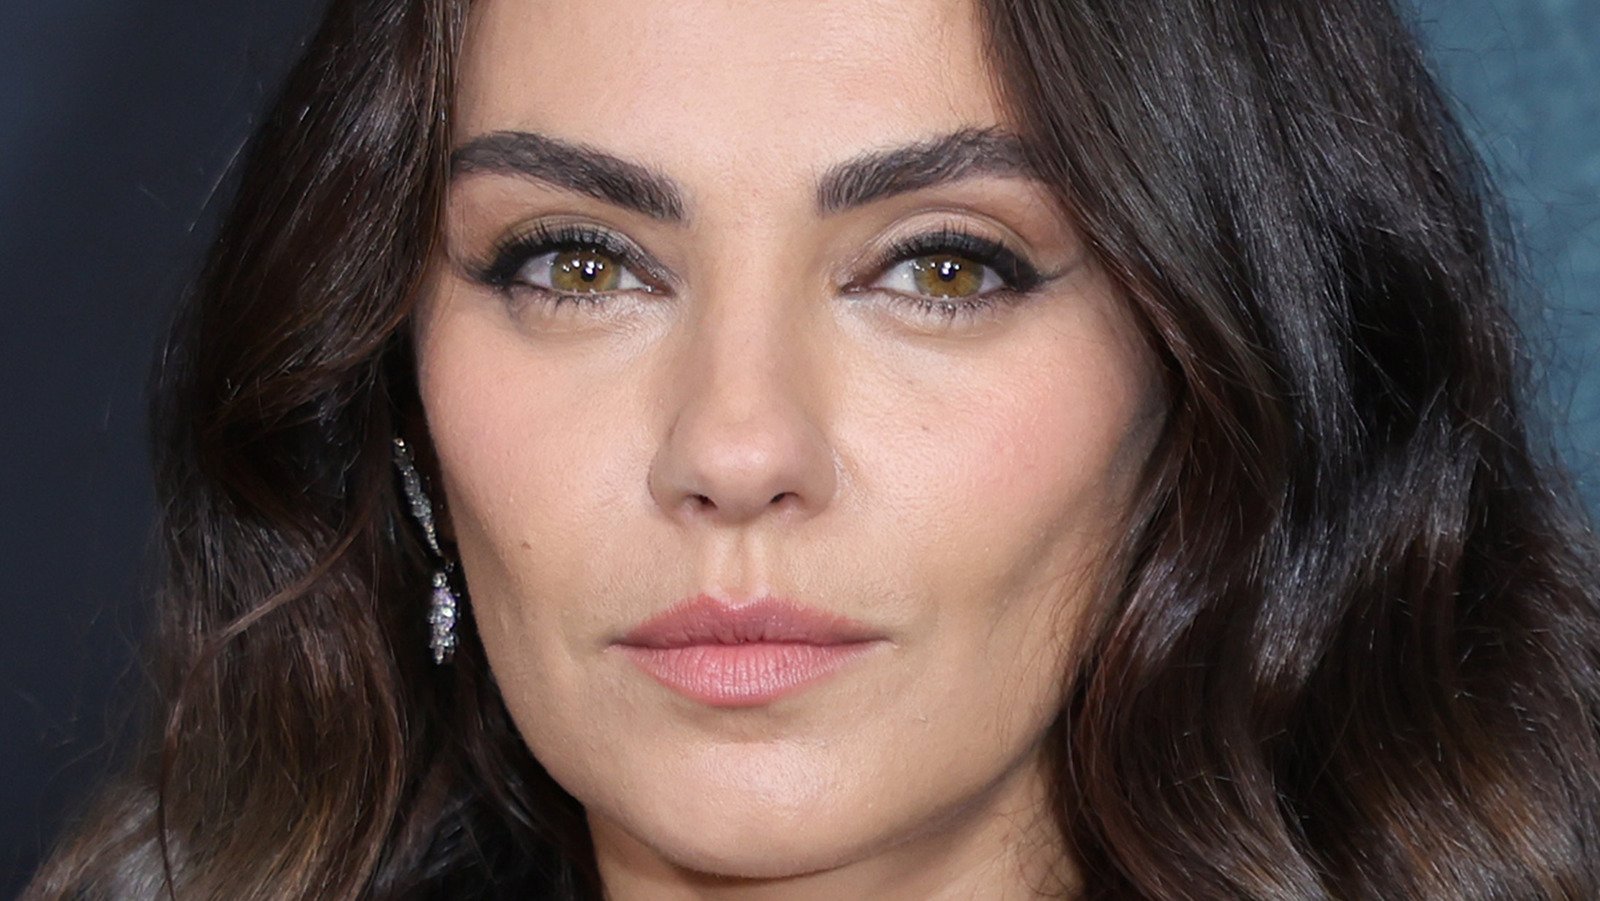 Mila Kunis And Demi Moore Have More Than One Thing In Common